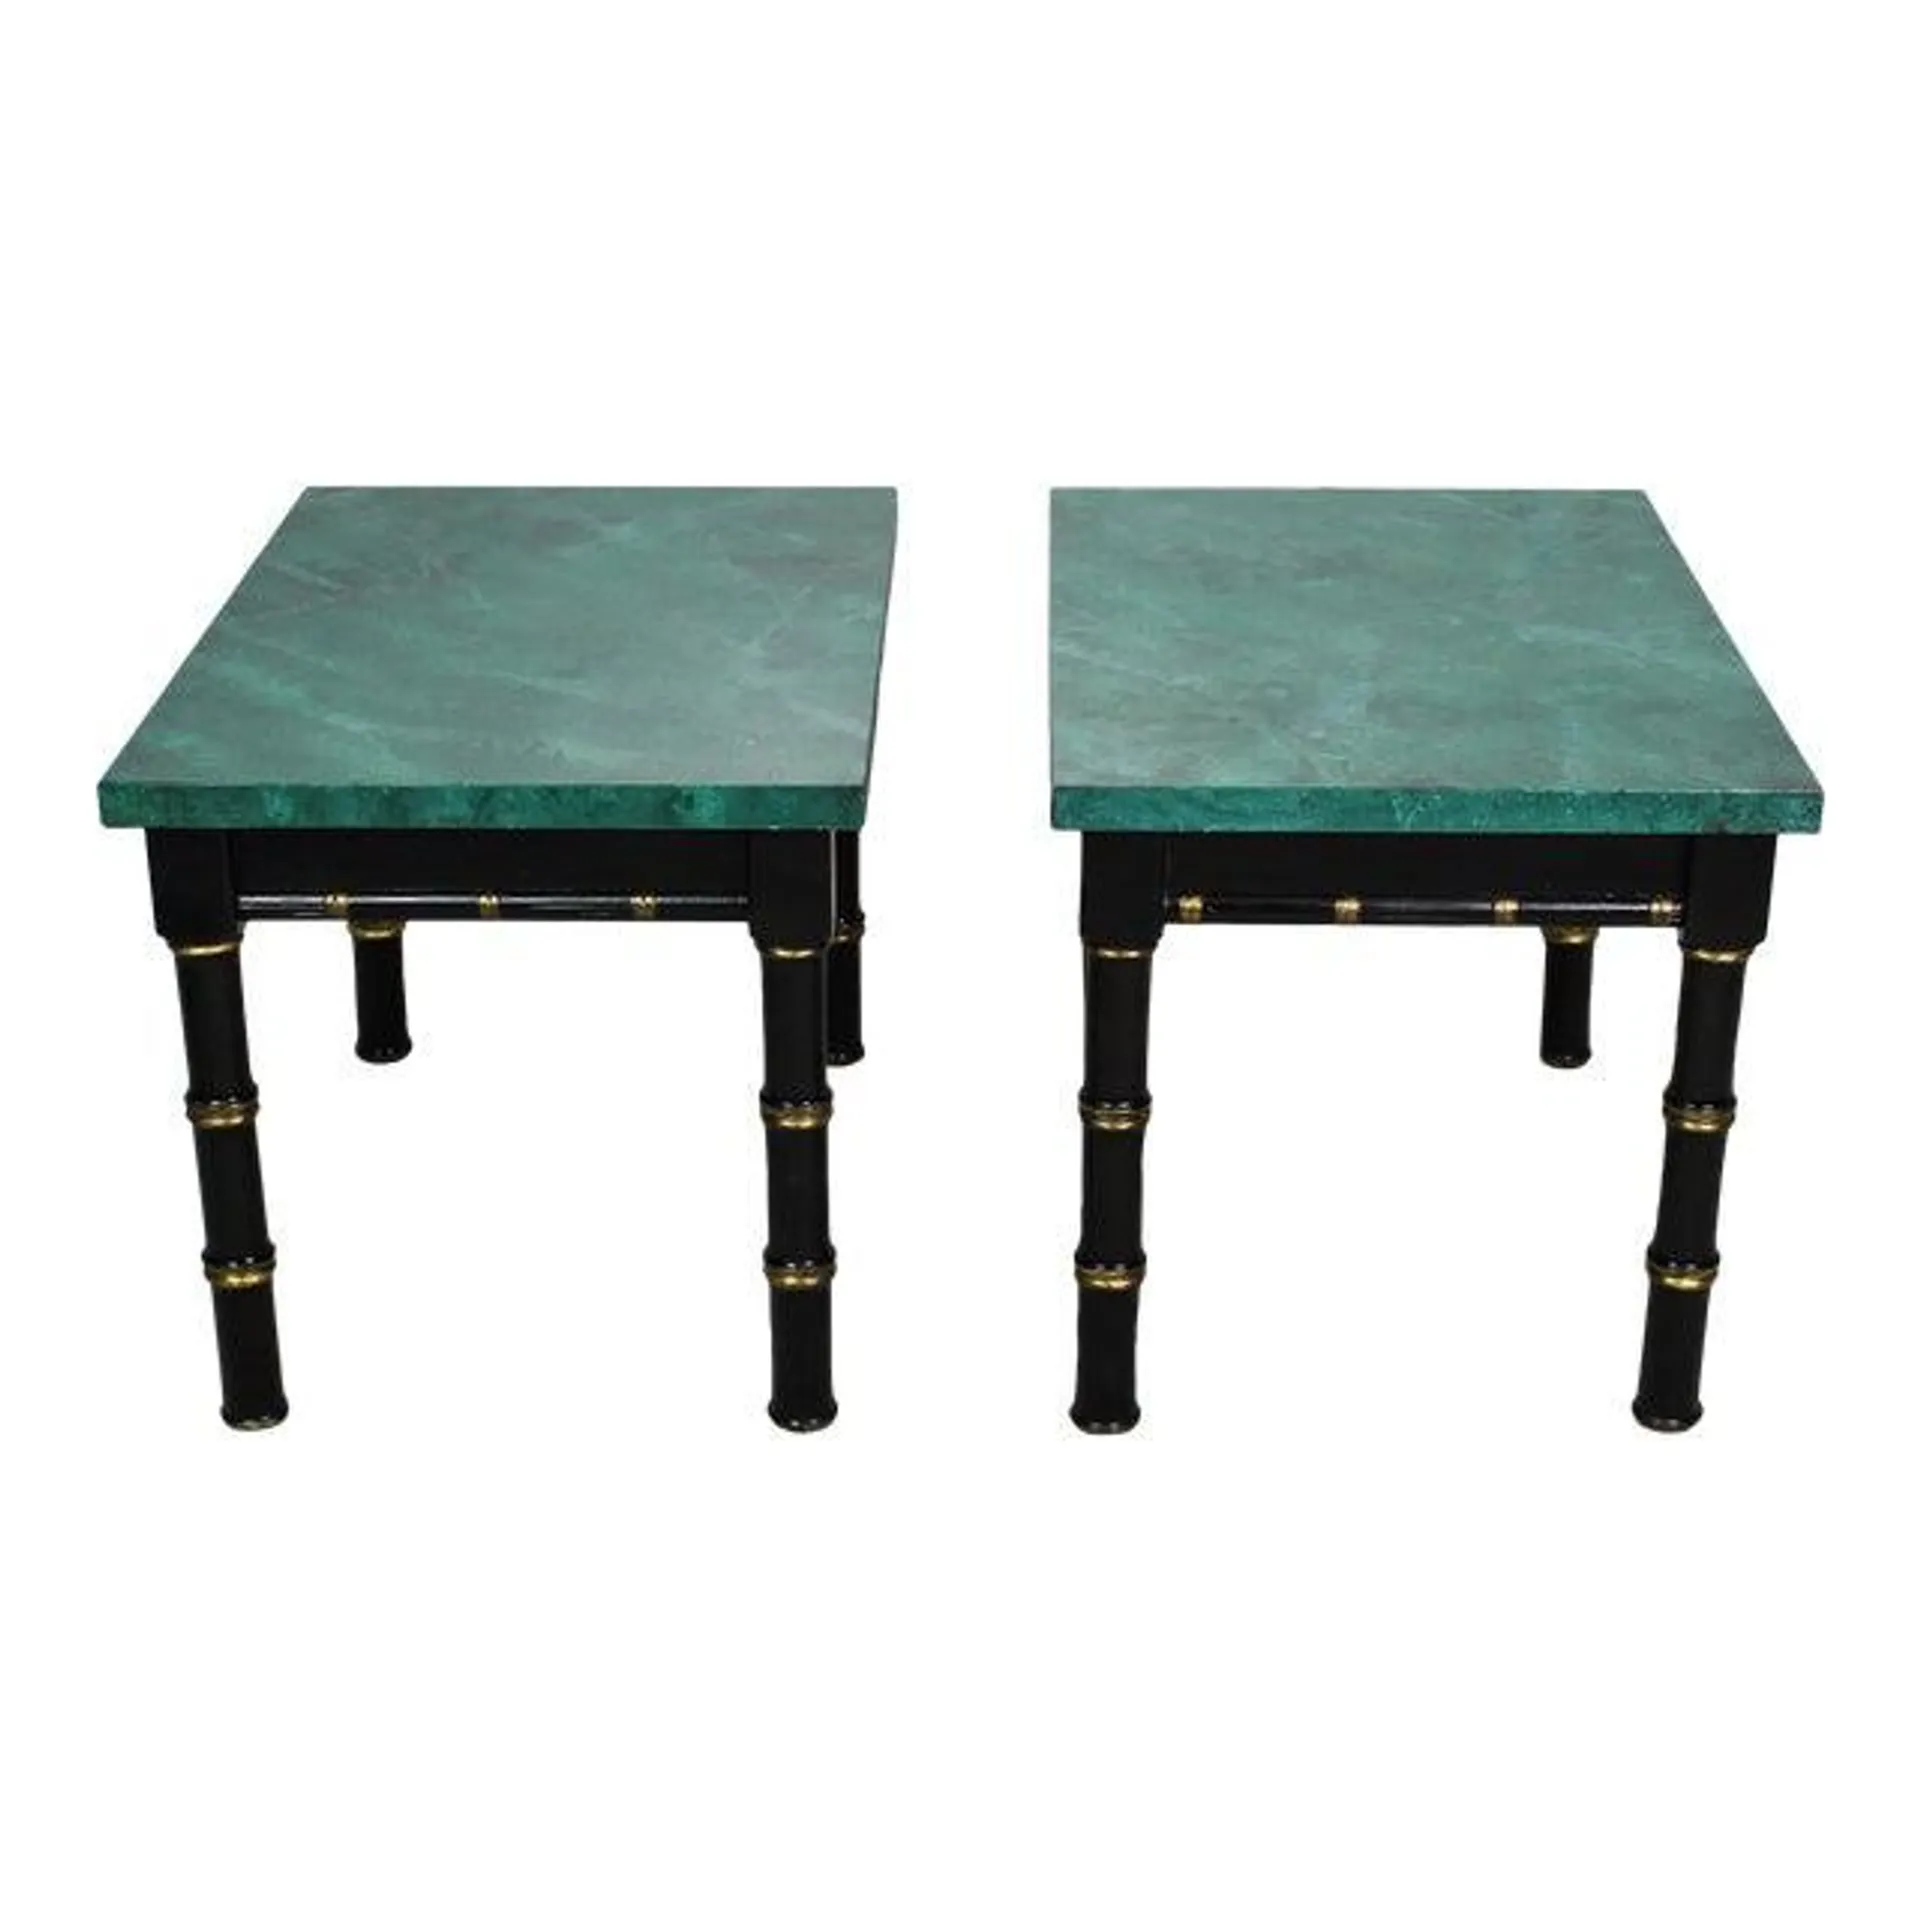 1969s Hollywood Regency Faux Bamboo Side Tables with Faux Green Marble Tops - a Pair